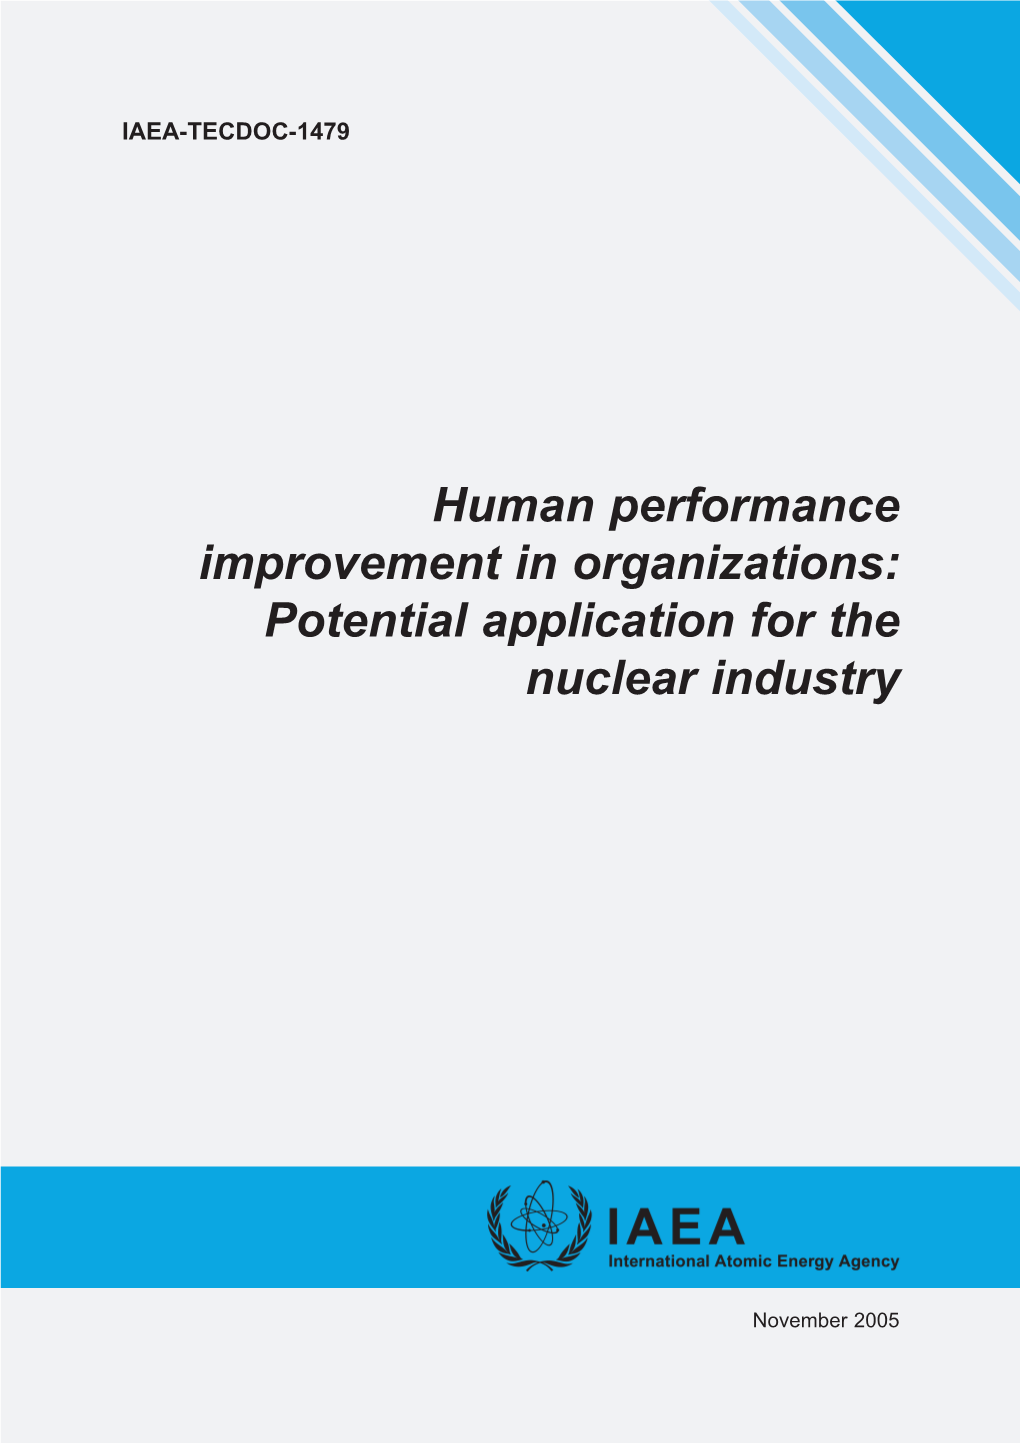 Human Performance Improvement in Organizations: Potential Application for the Nuclear Industry